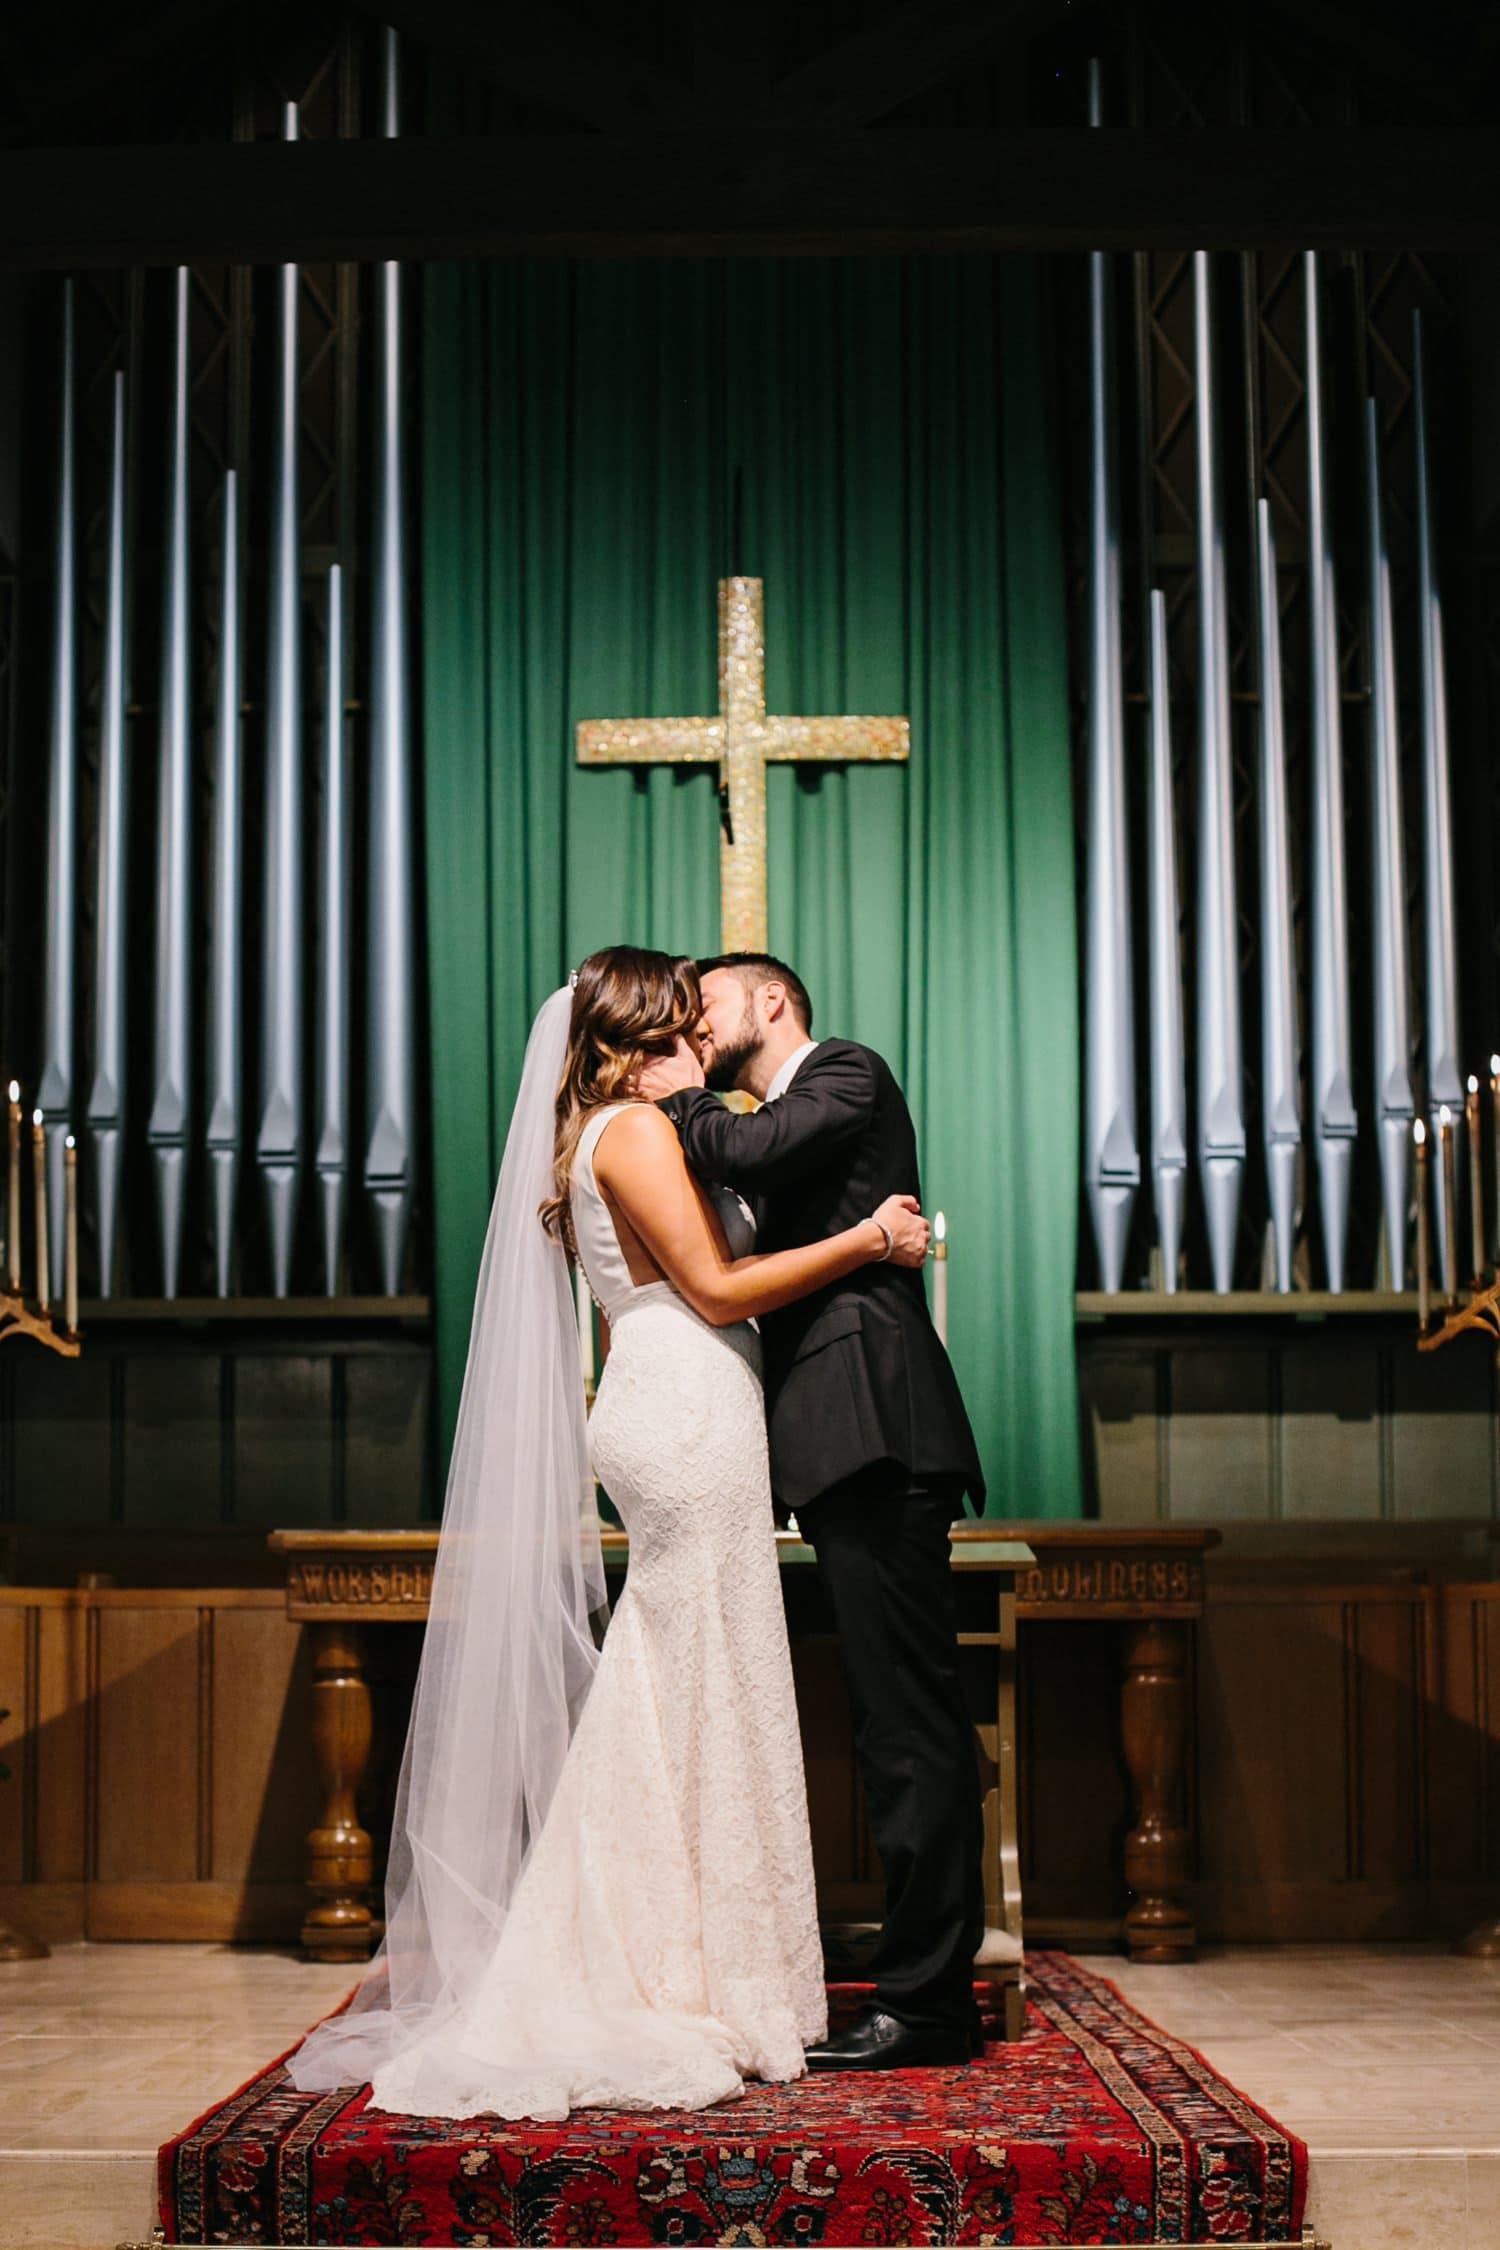 Wedding ceremony at plymouth congregational church